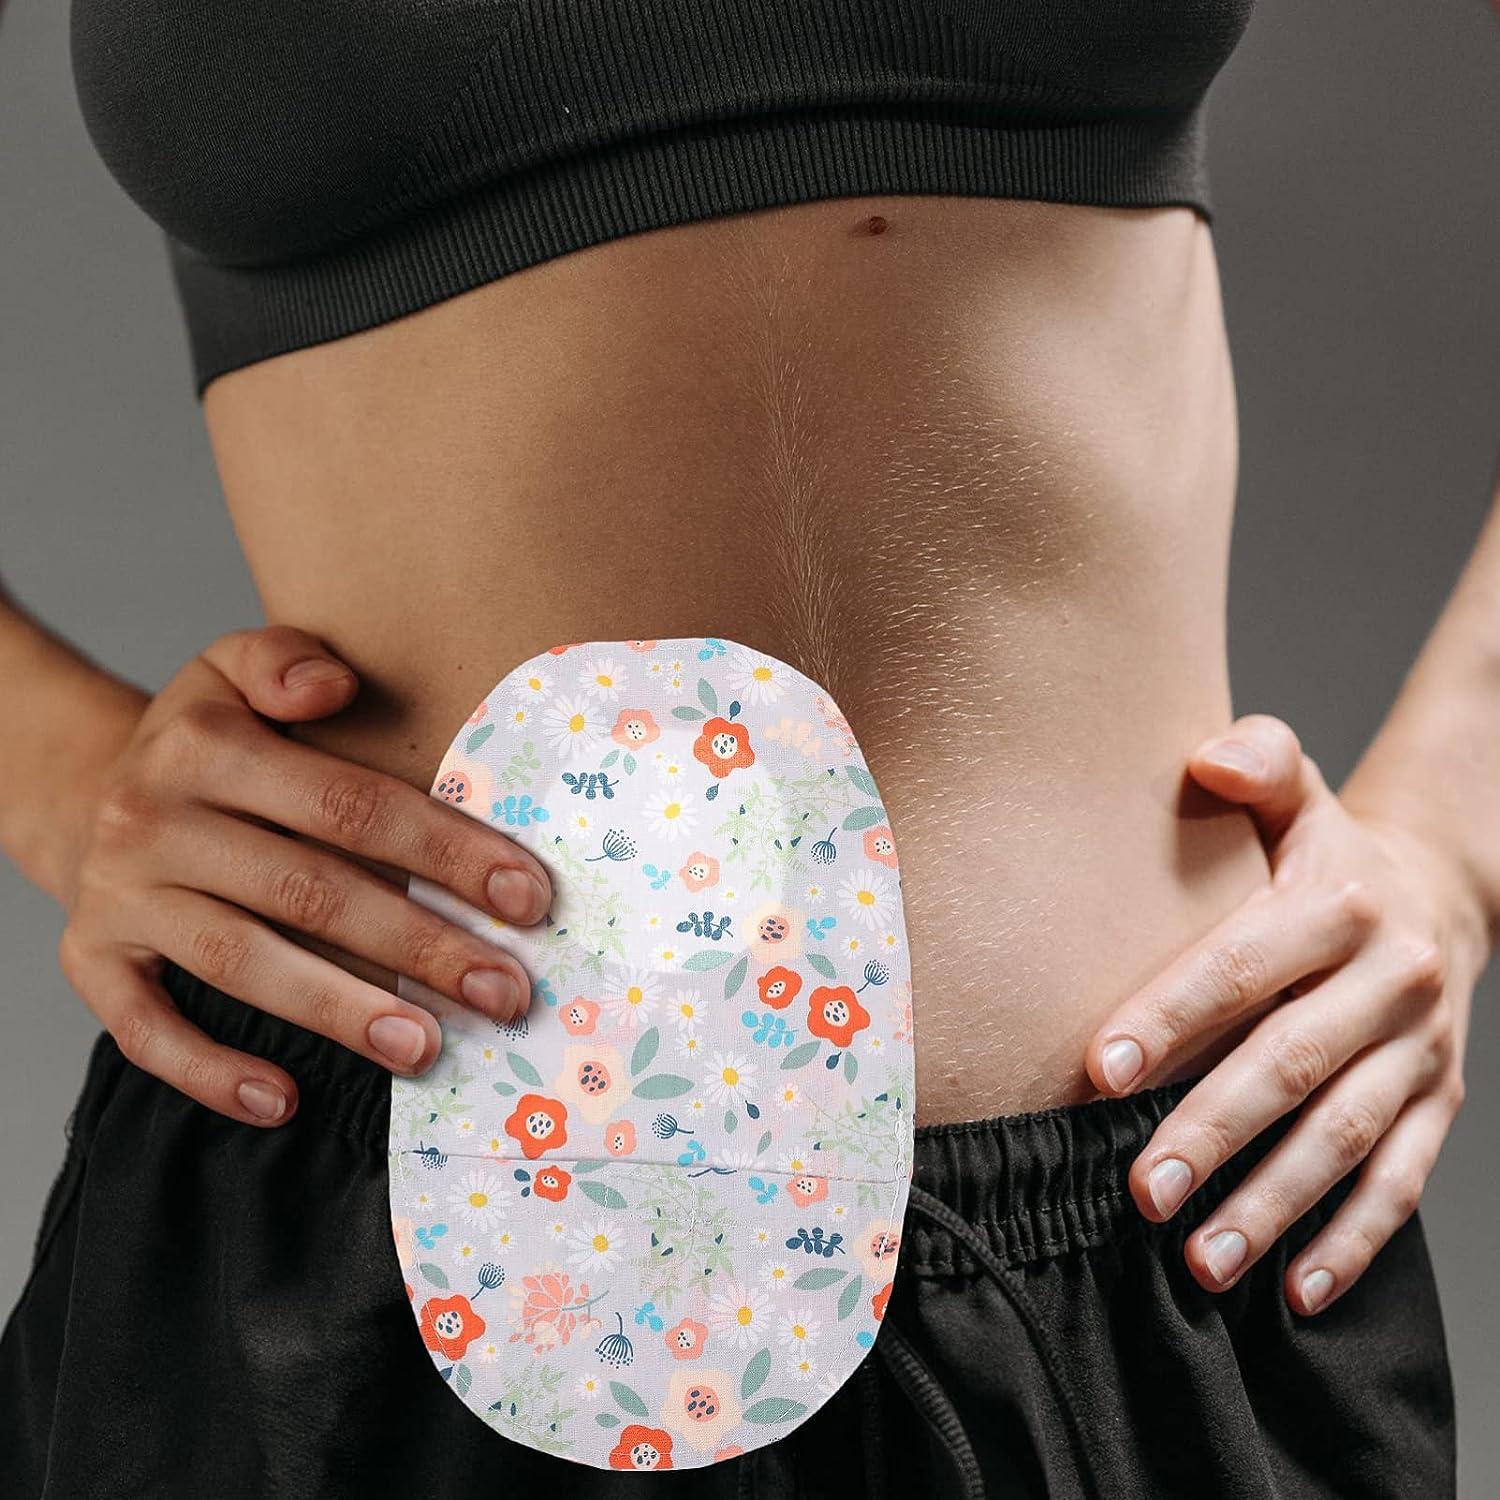 Tofficu Ostomy Pouch Colostomy Bag Cover: 2Pcs Stretchy Ostomy Bag Covers  Protectors Ostomy Supplies